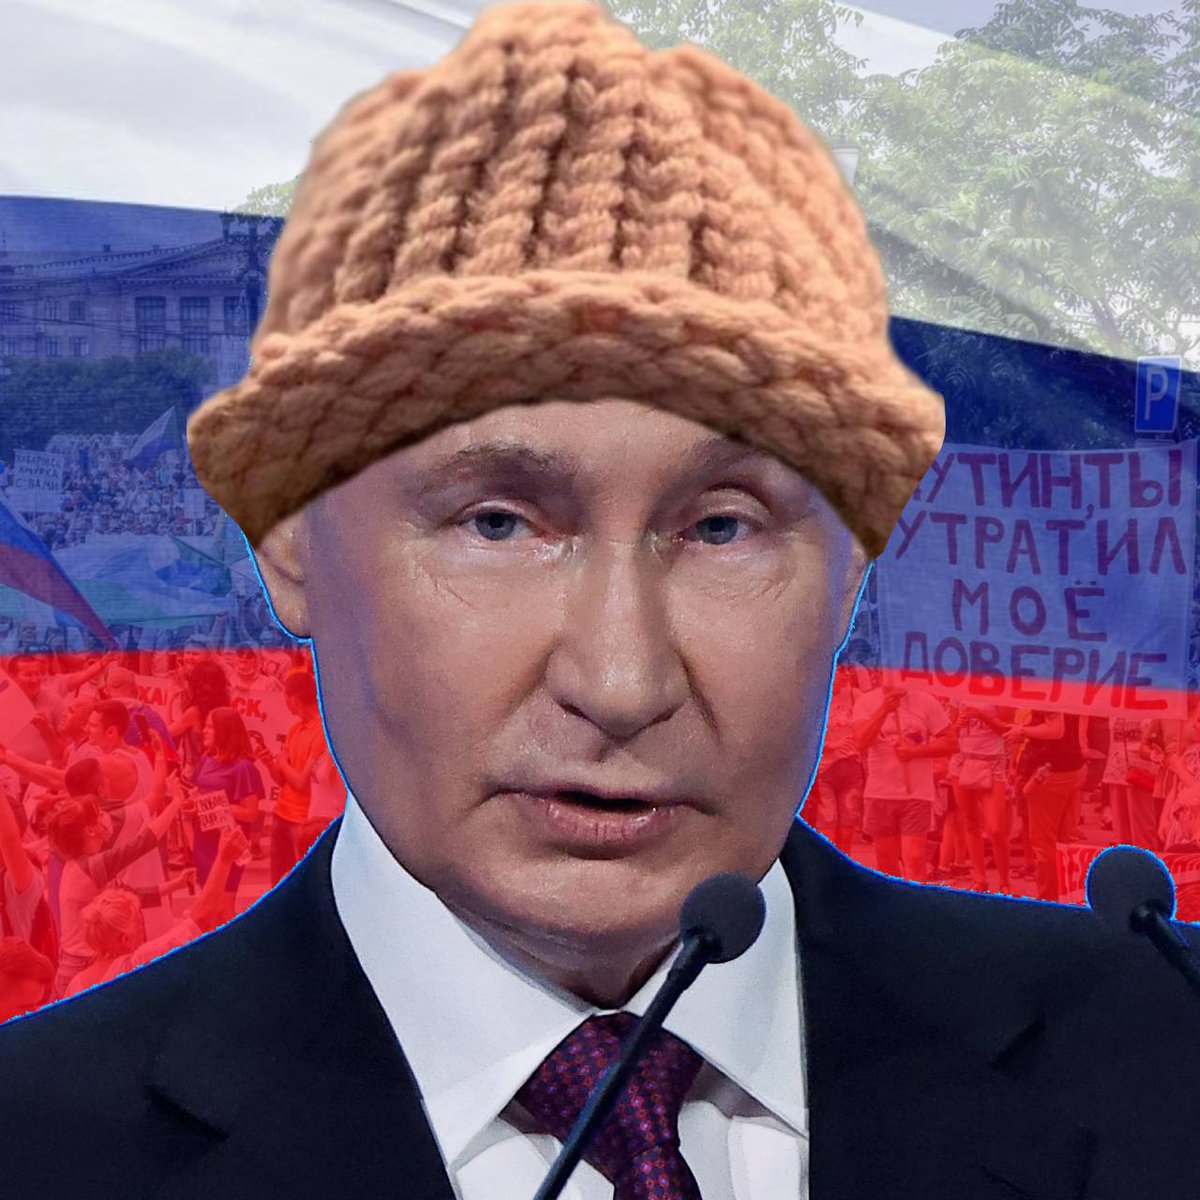 @dr_crypto_calls Oh sweet! Do they need a president?

#PUTINWIF is the hat only wearer chosen by fate. @PutinWifHat_

Get a bag nao #Solanamemes @pumpdotfun